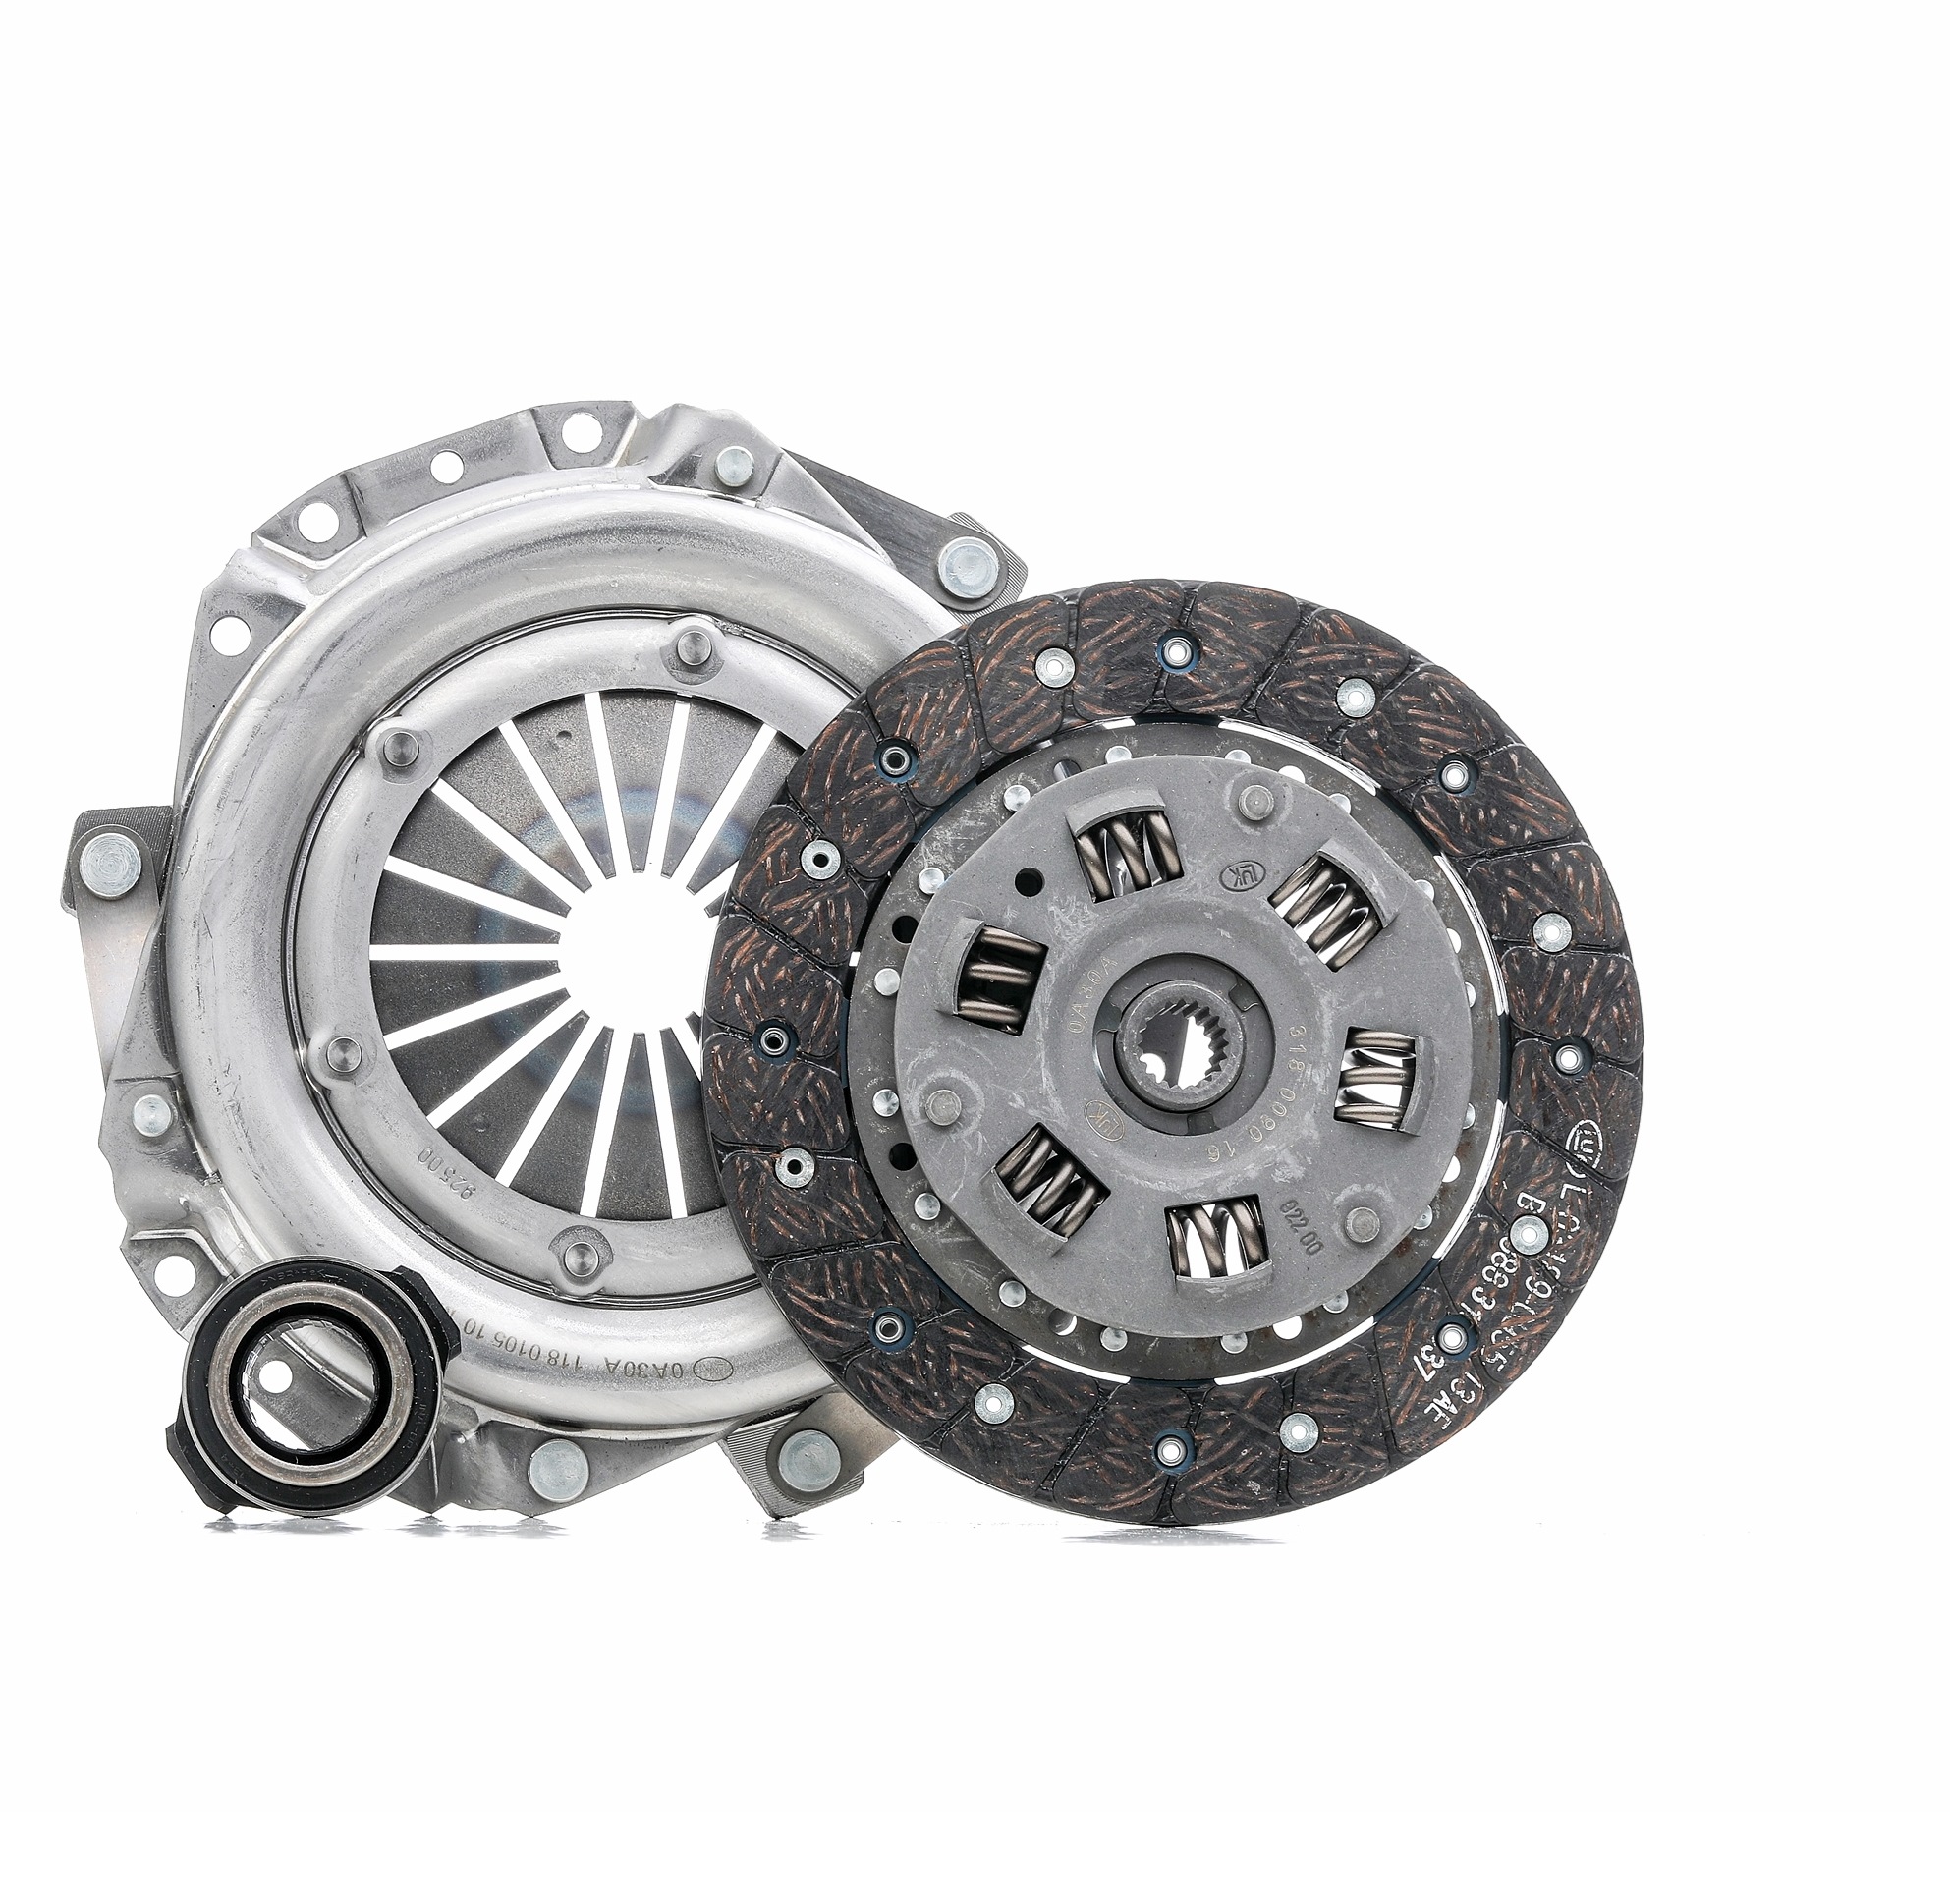 LuK BR 0222 618 0171 06 Clutch kit with clutch release bearing, with clutch disc, 180mm